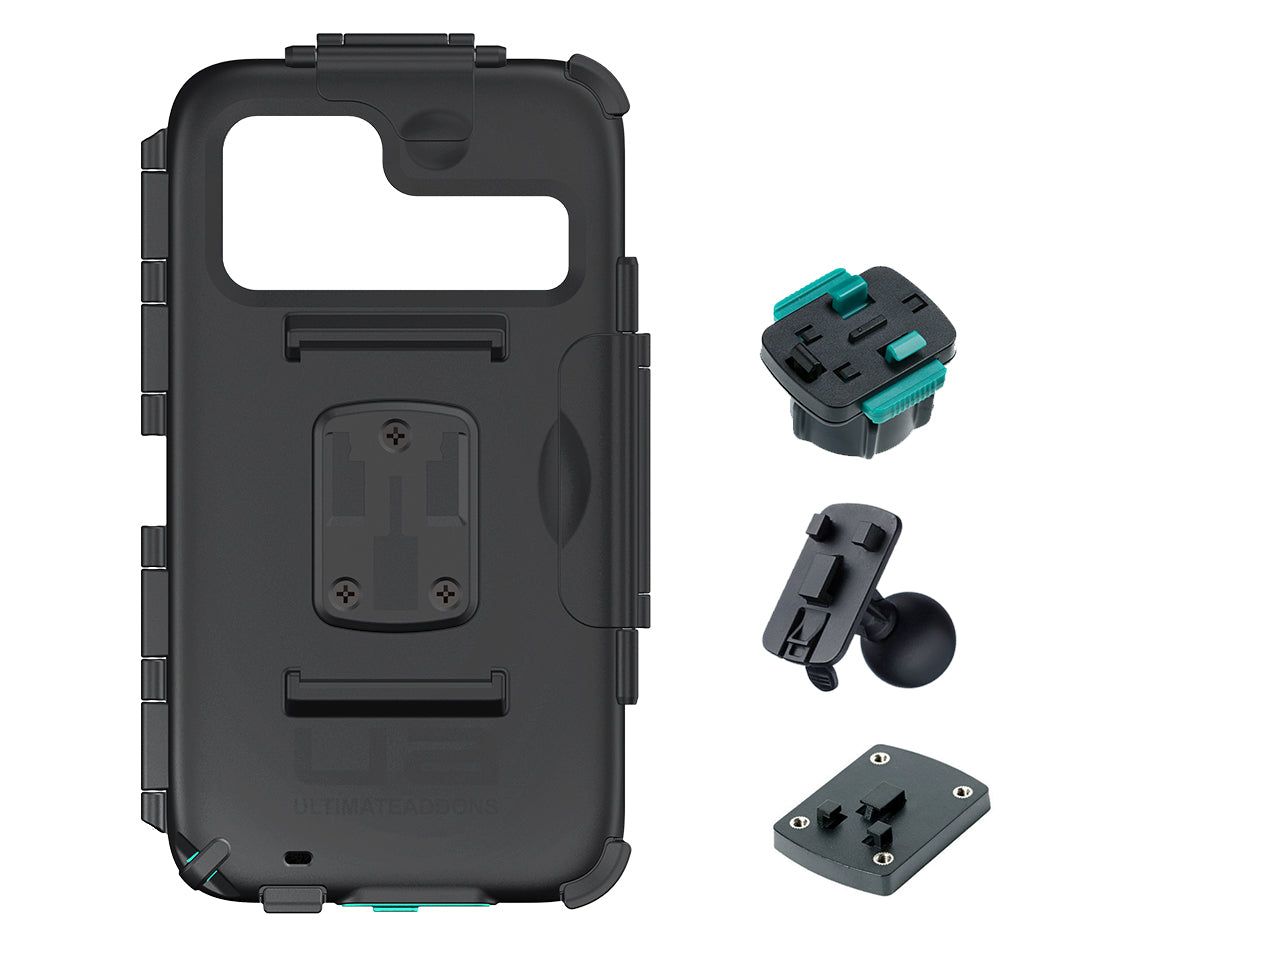 Ultimateaddons Huawei Tough Waterproof Phone Cases and Durable Adapters